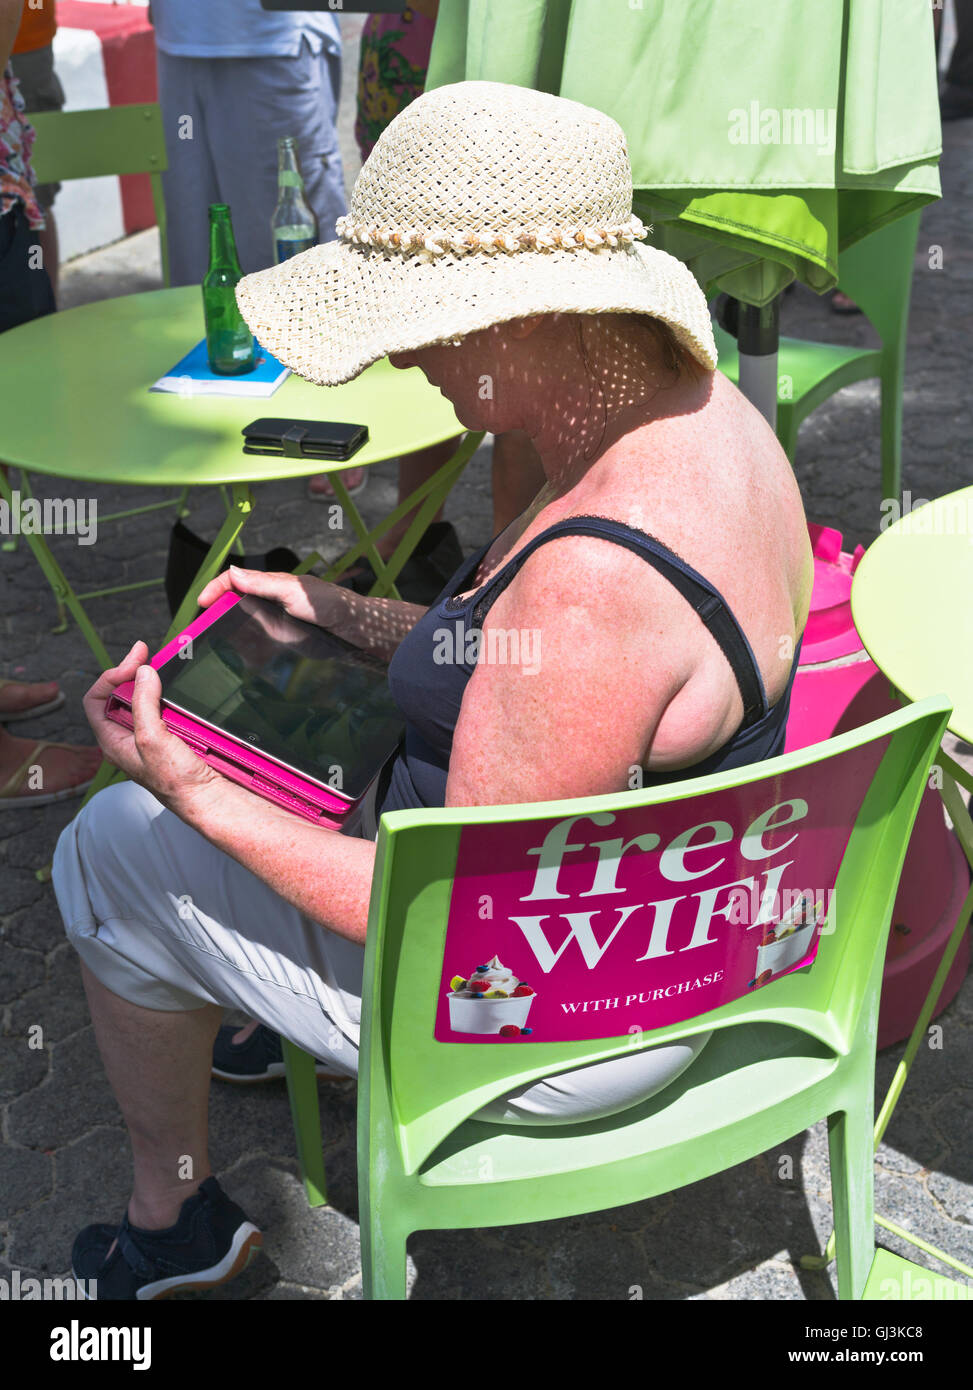 dh Wifi cafe hotspot TOURIST CARIBBEAN Woman using Ipad free email back home holiday connection Stock Photo